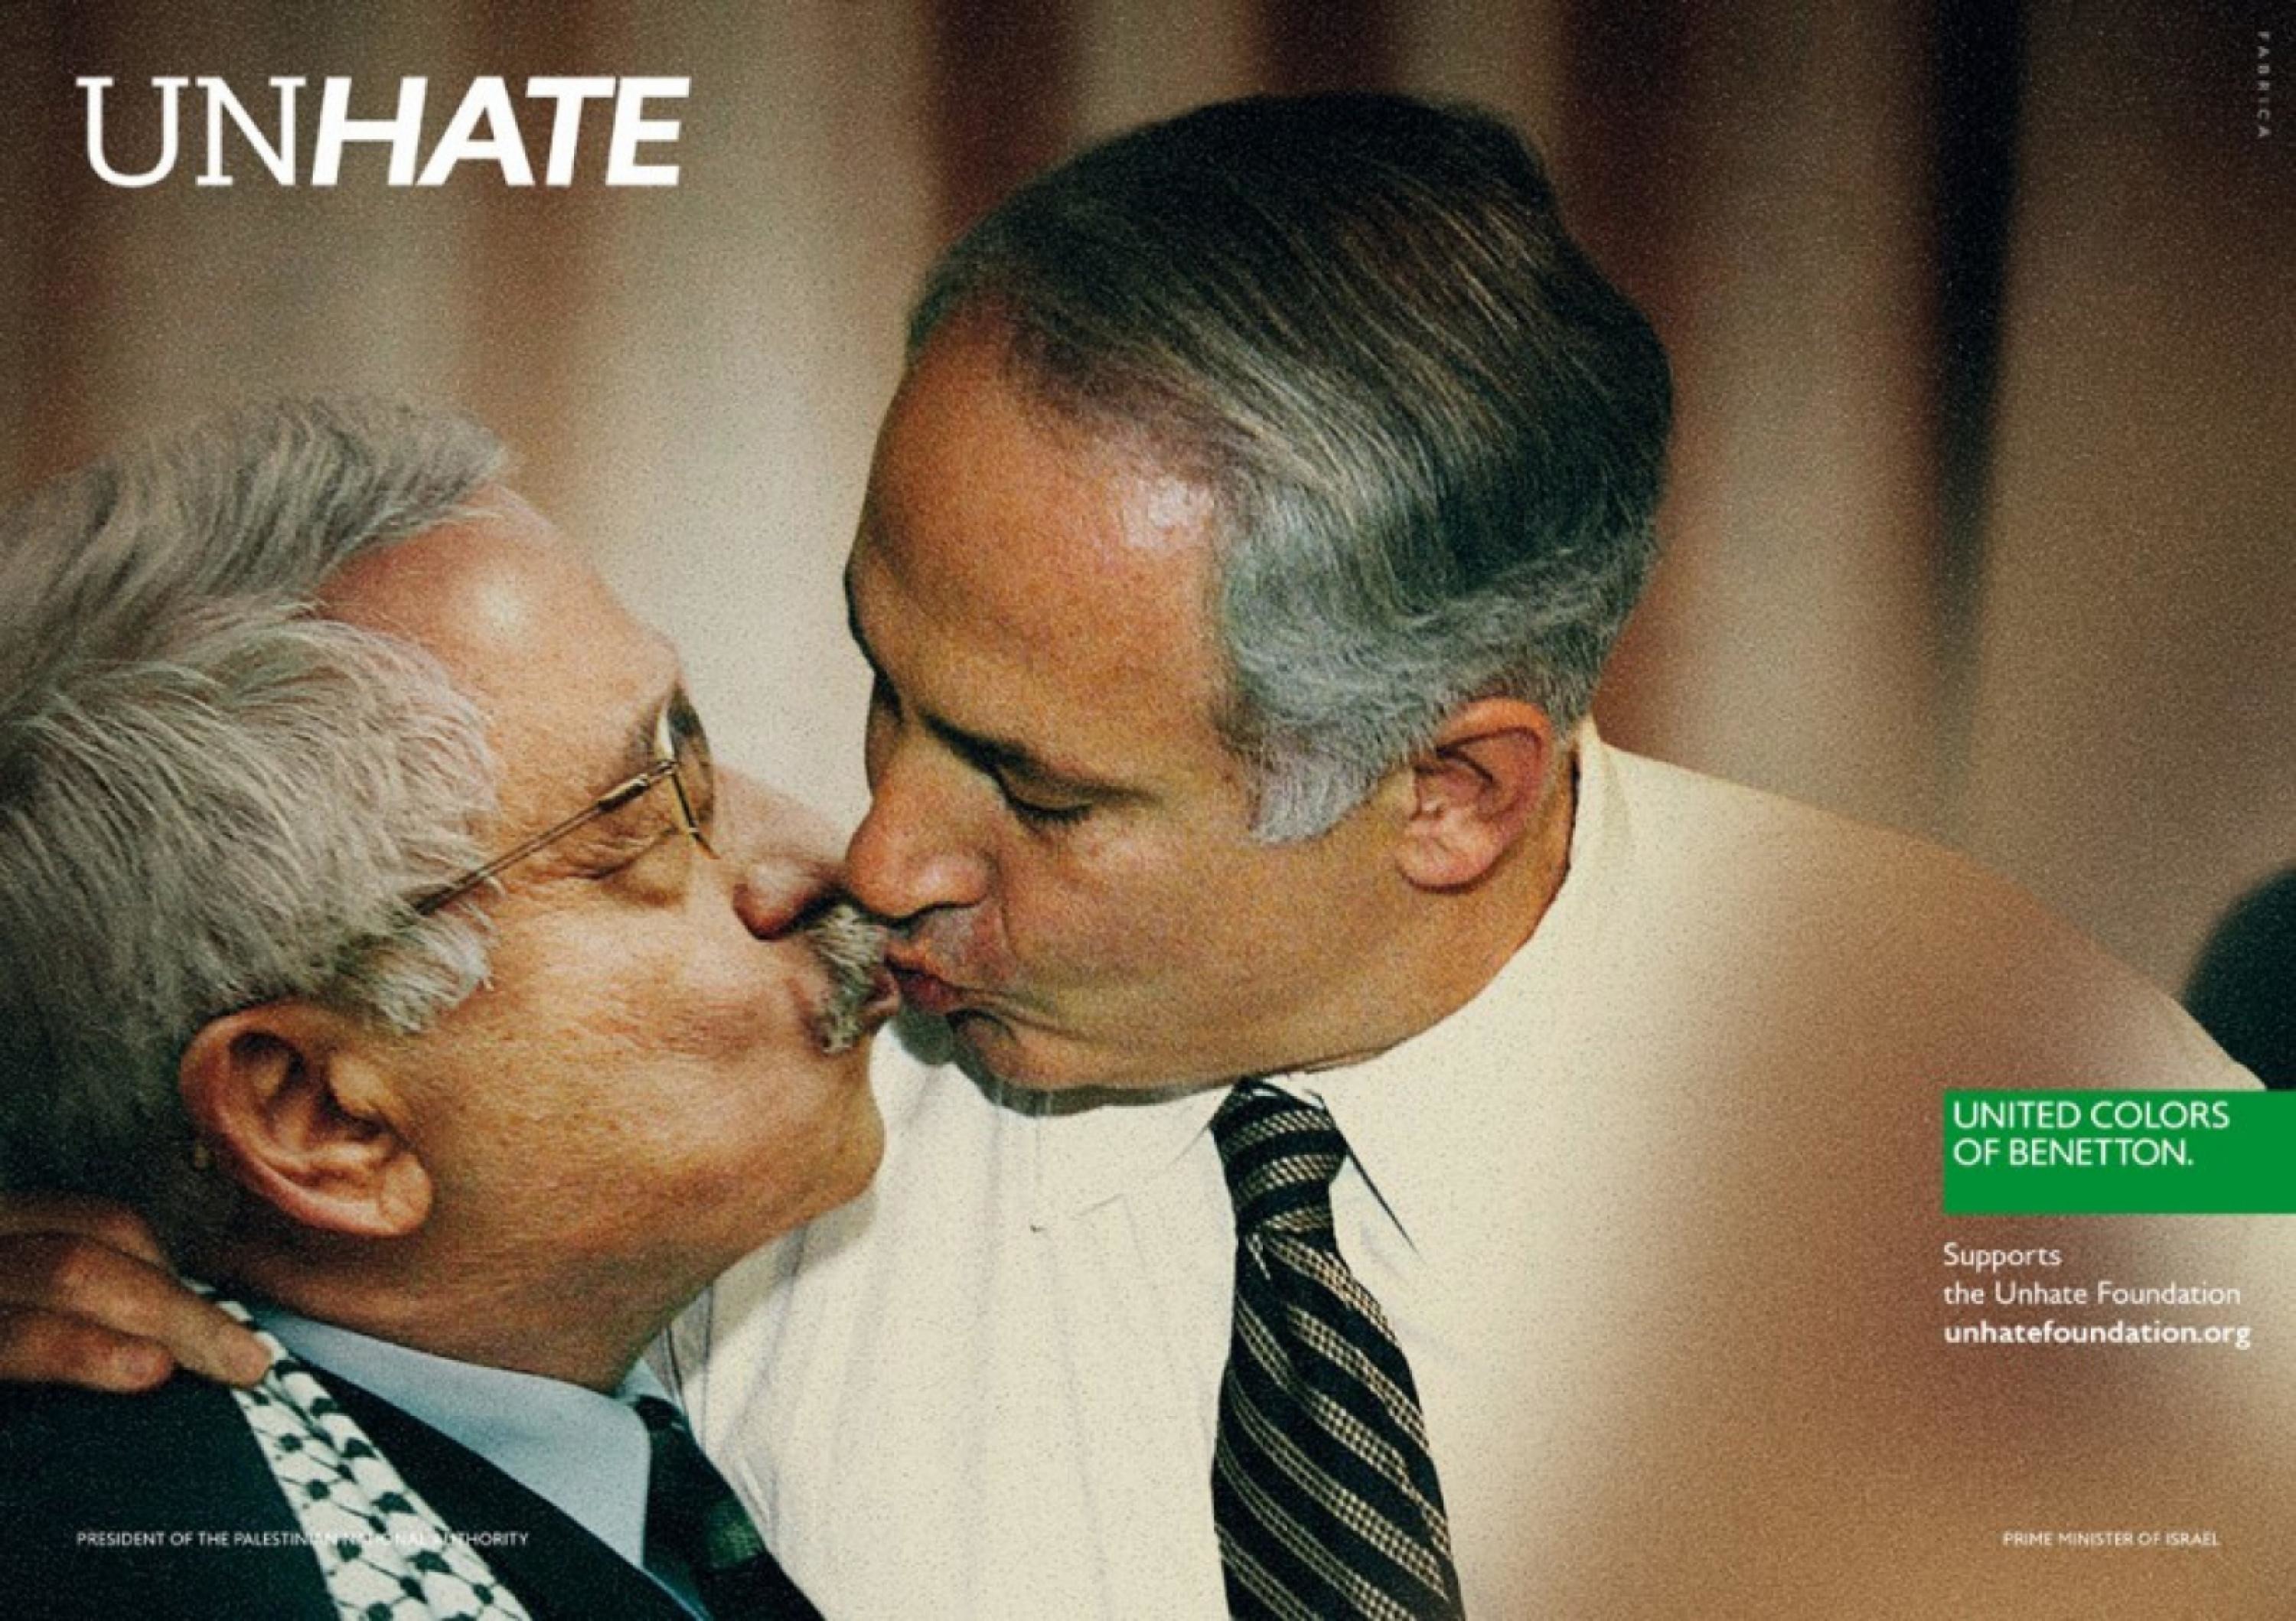 UNHATE (PALESTINE AND ISRAEL)